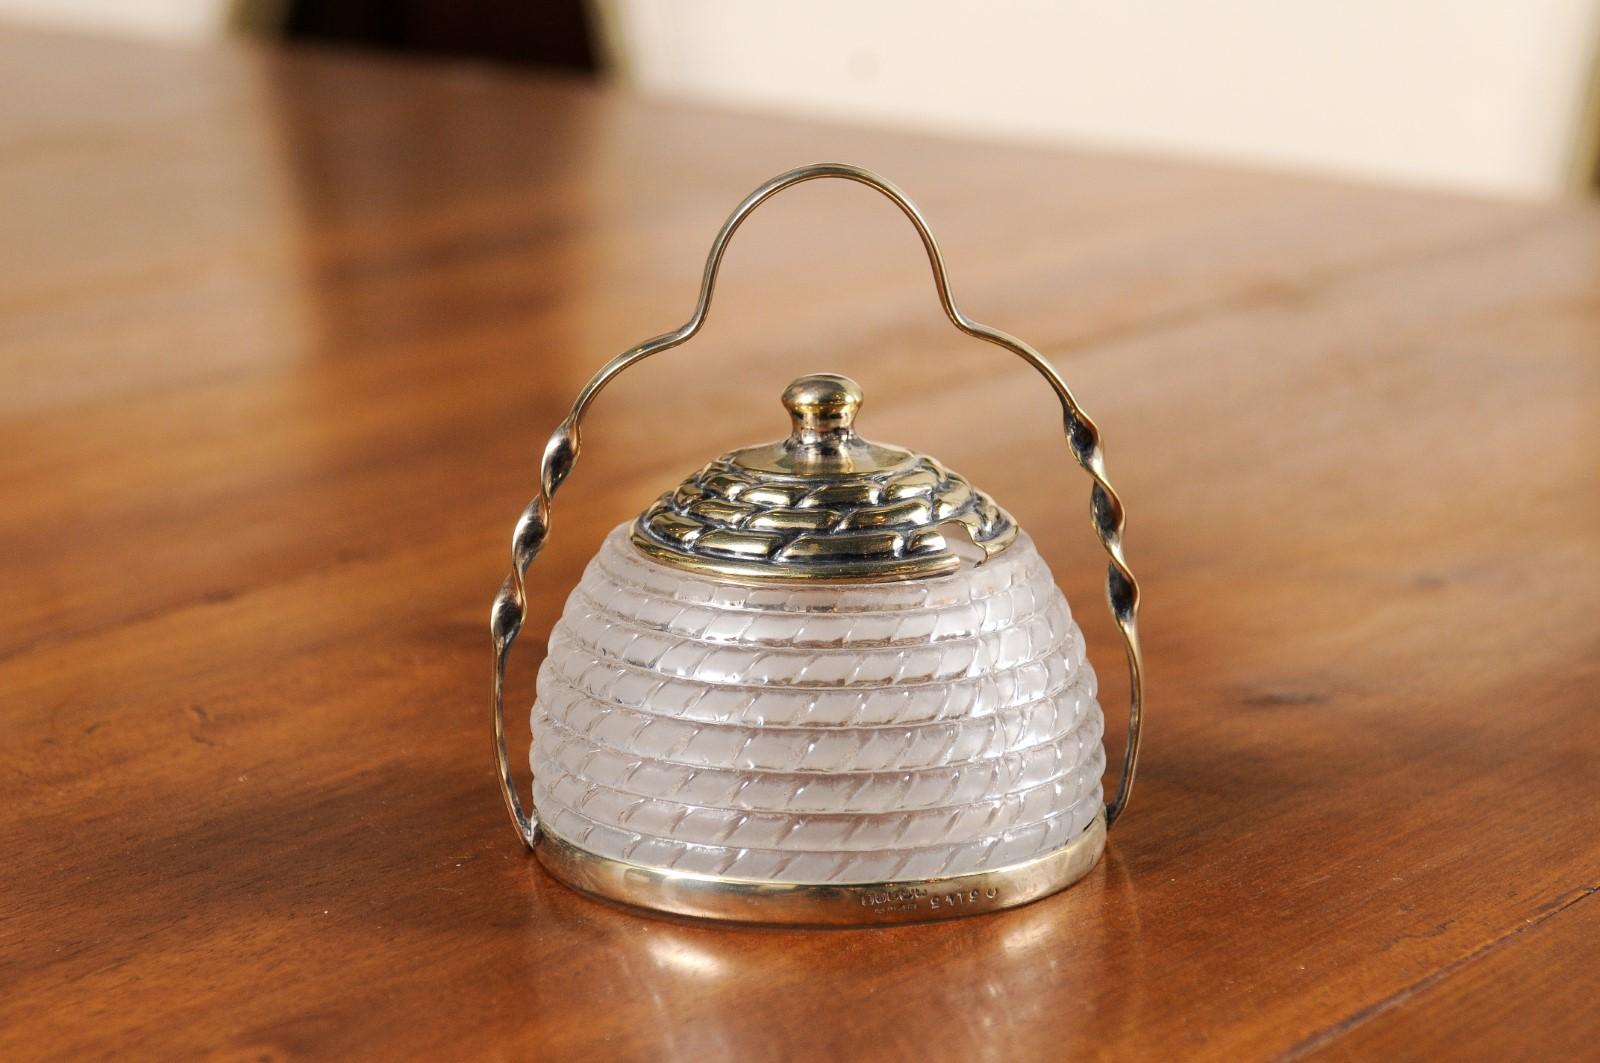 An English glass and silver lidded container from the 20th century, with twisted effects and top handle. created in England during the 20th century, this small container features a frosted glass body made of a succession of rings with angled